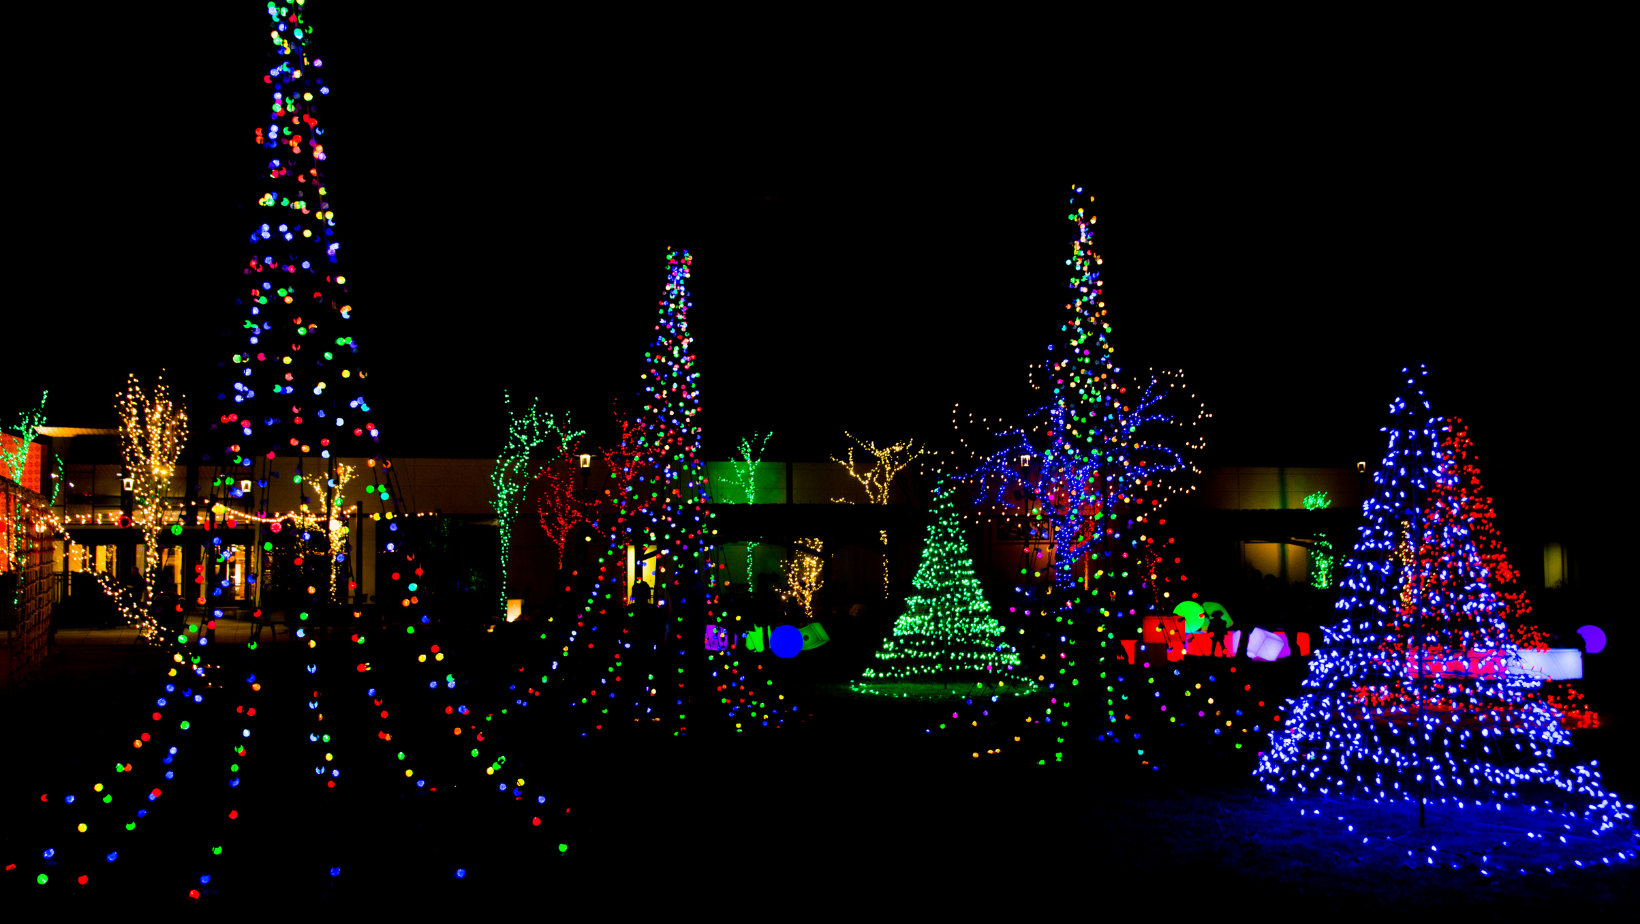 An outdoor light display: Christmas lights in the Iowa City area